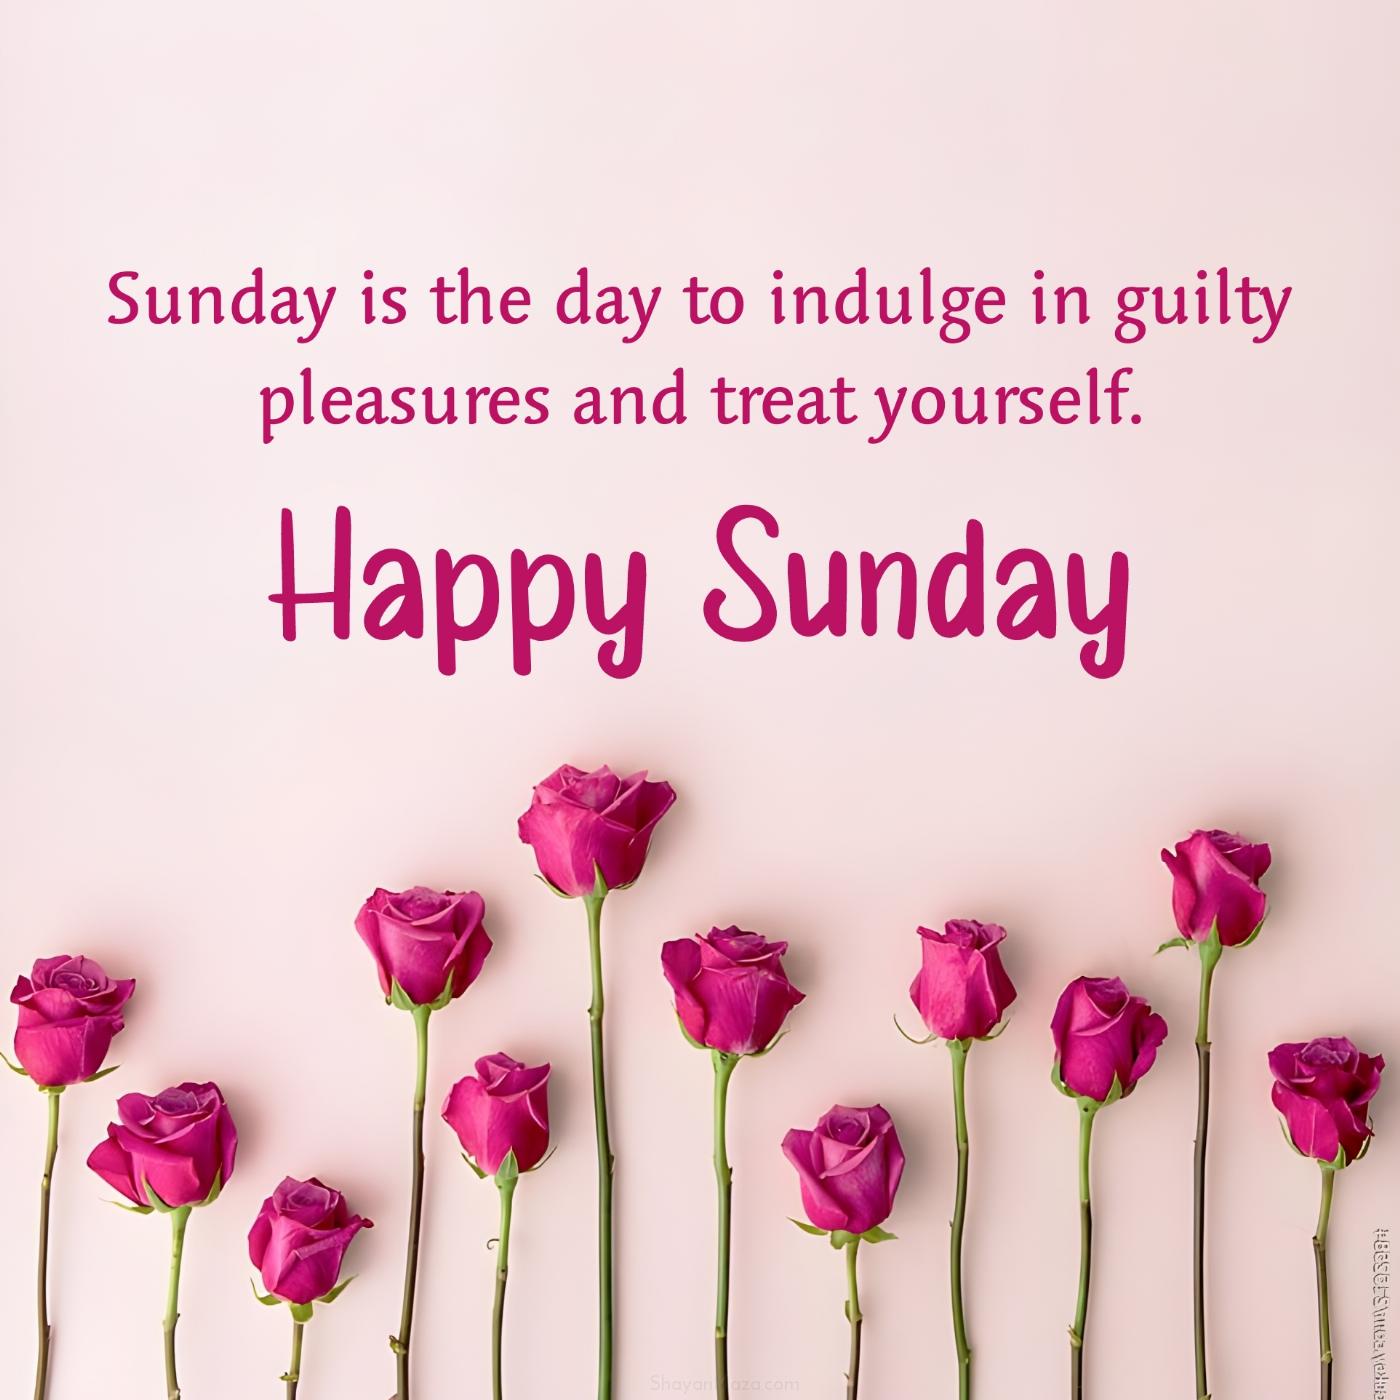 Sunday is the day to indulge in guilty pleasures and treat yourself